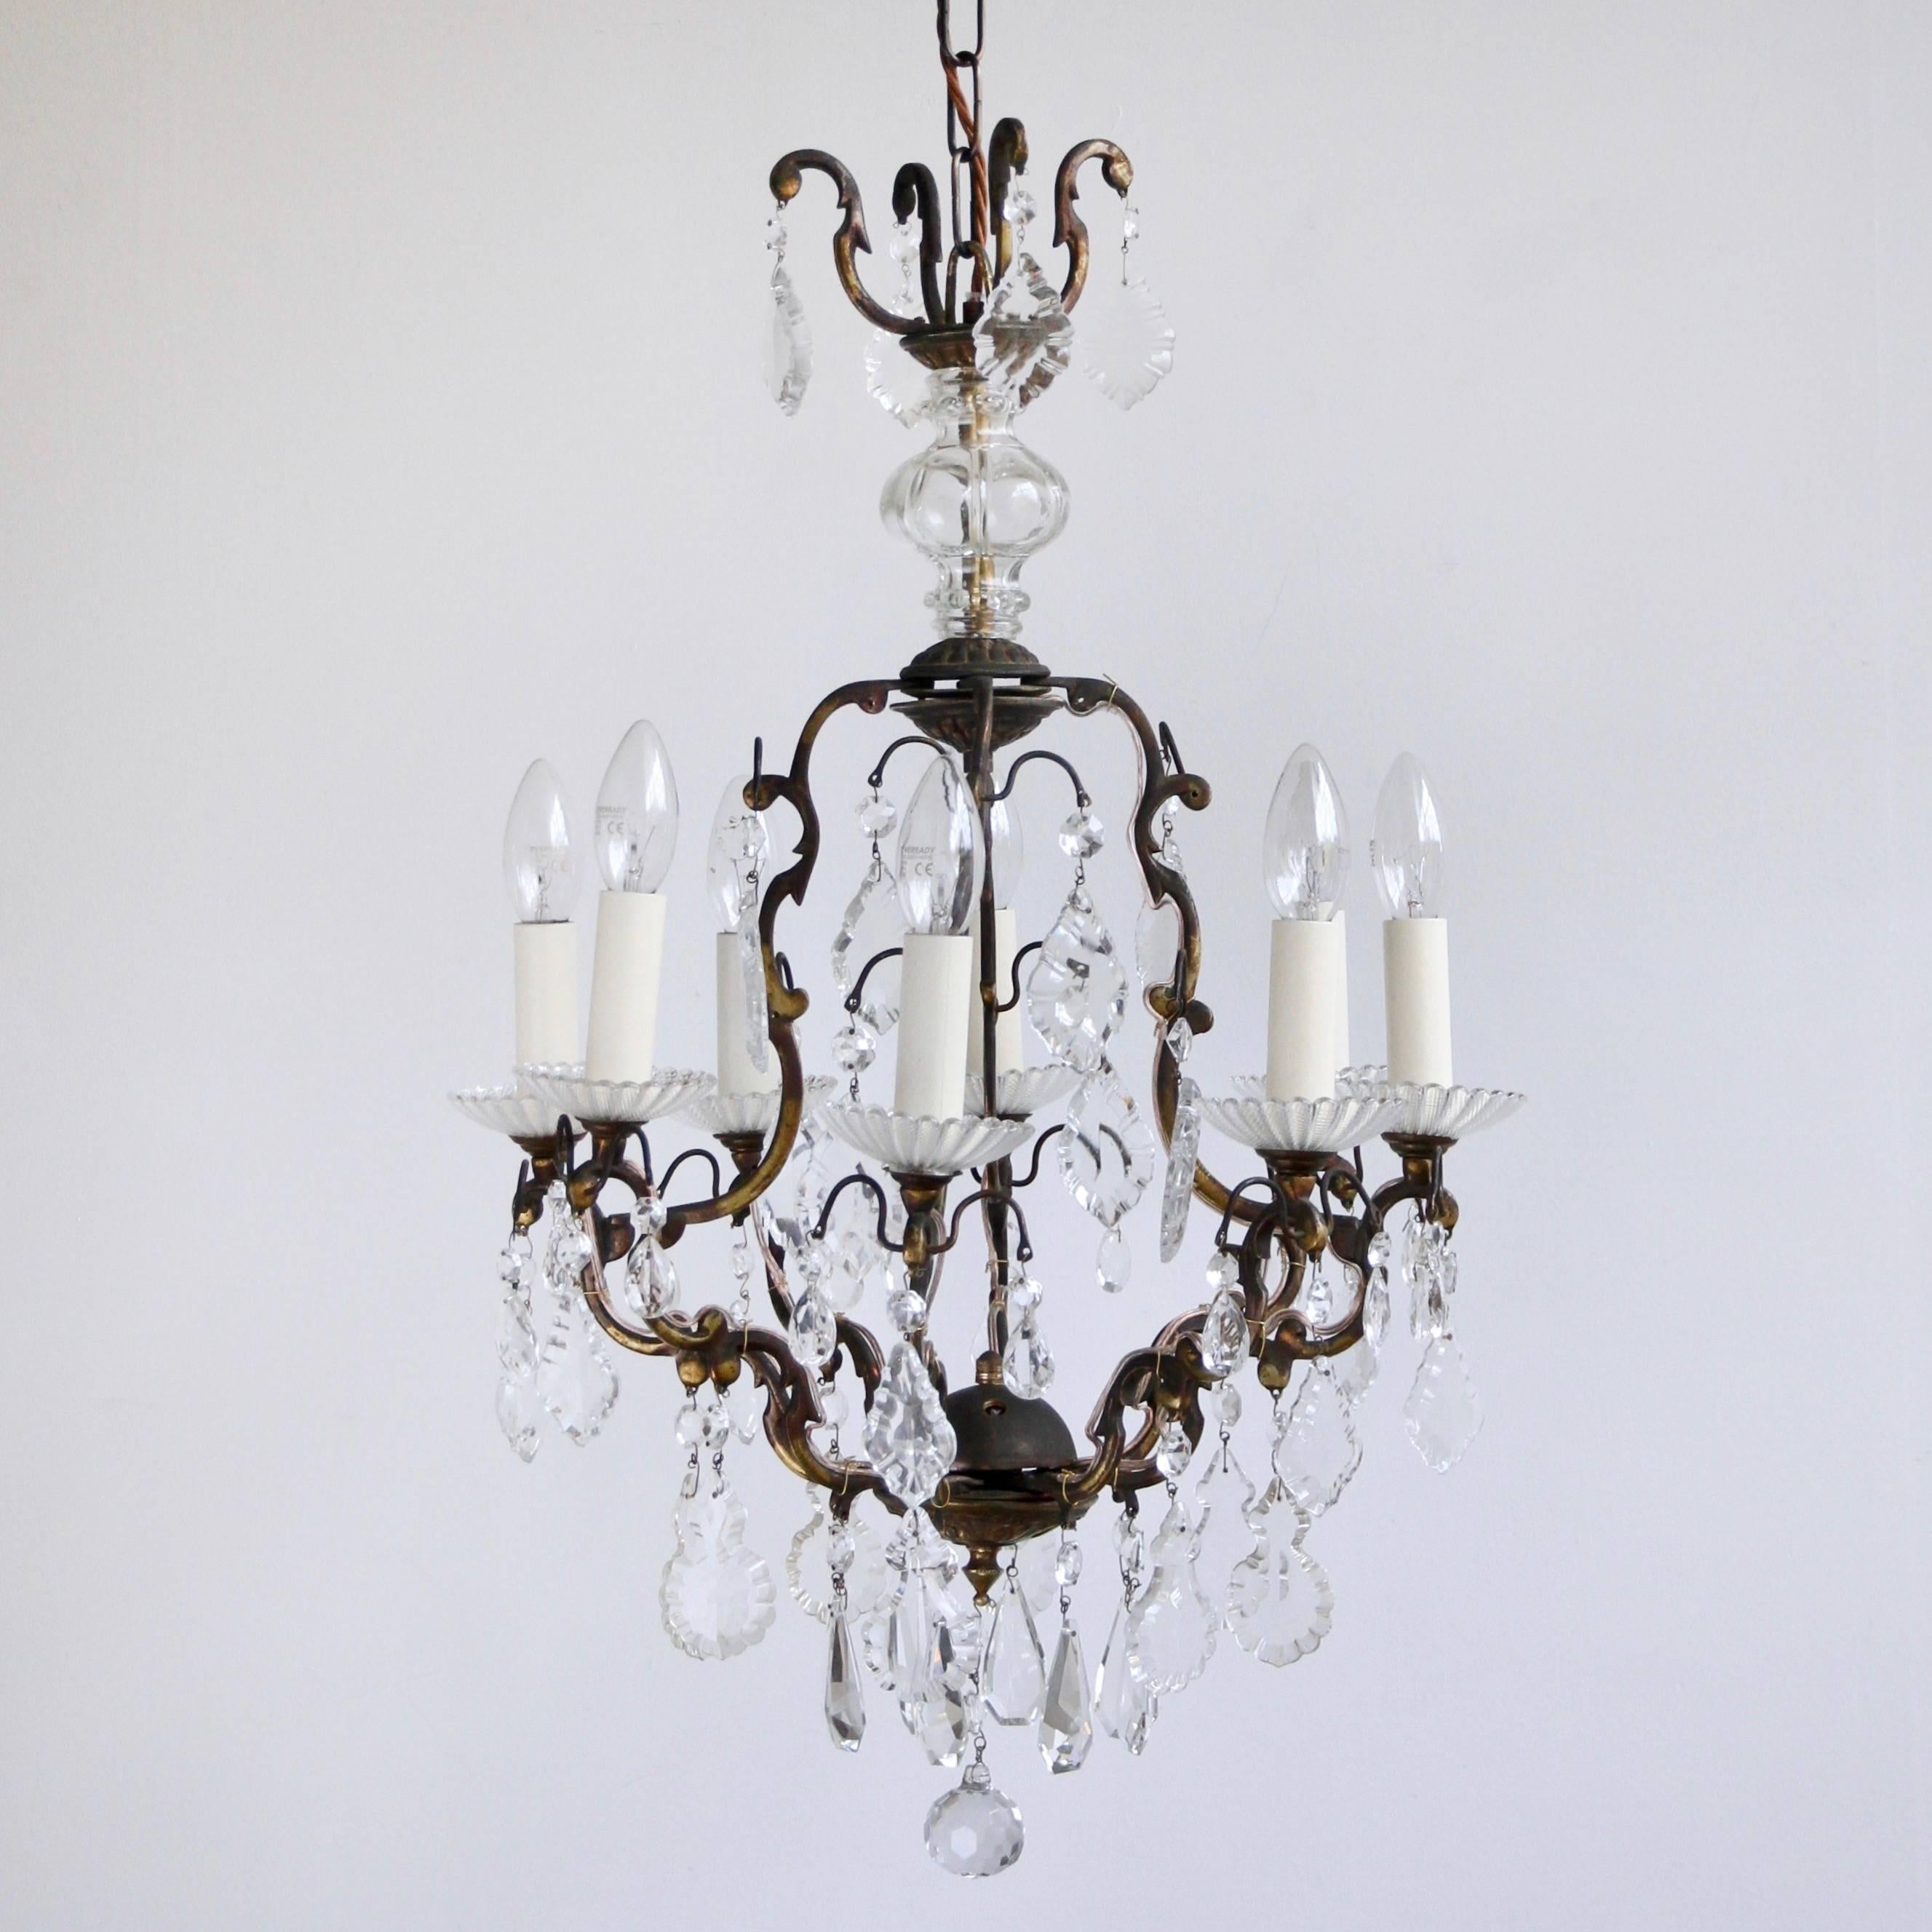 Italian Delicate Early 1900s Brass Birdcage Chandelier with Glass Bobeche Pans